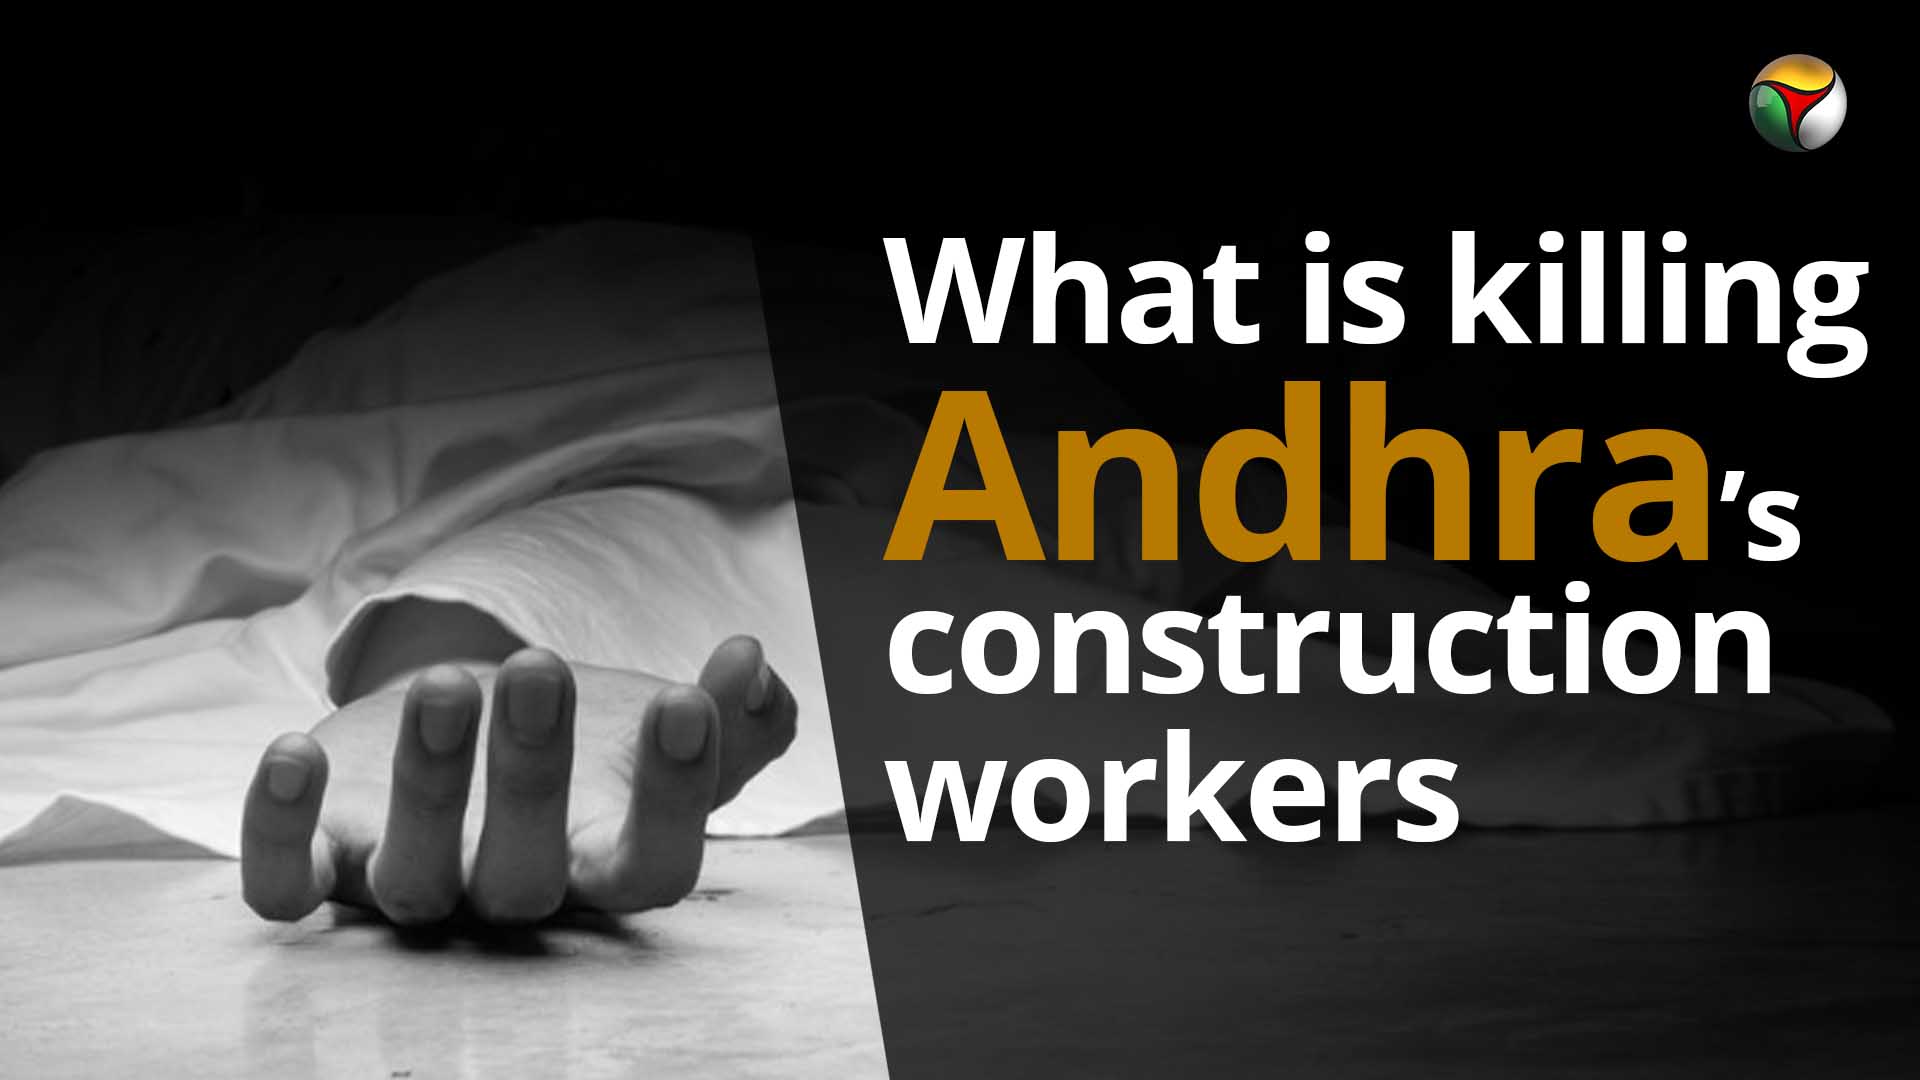 Six deaths and a silent govt: What is behind Andhra workers suicides?